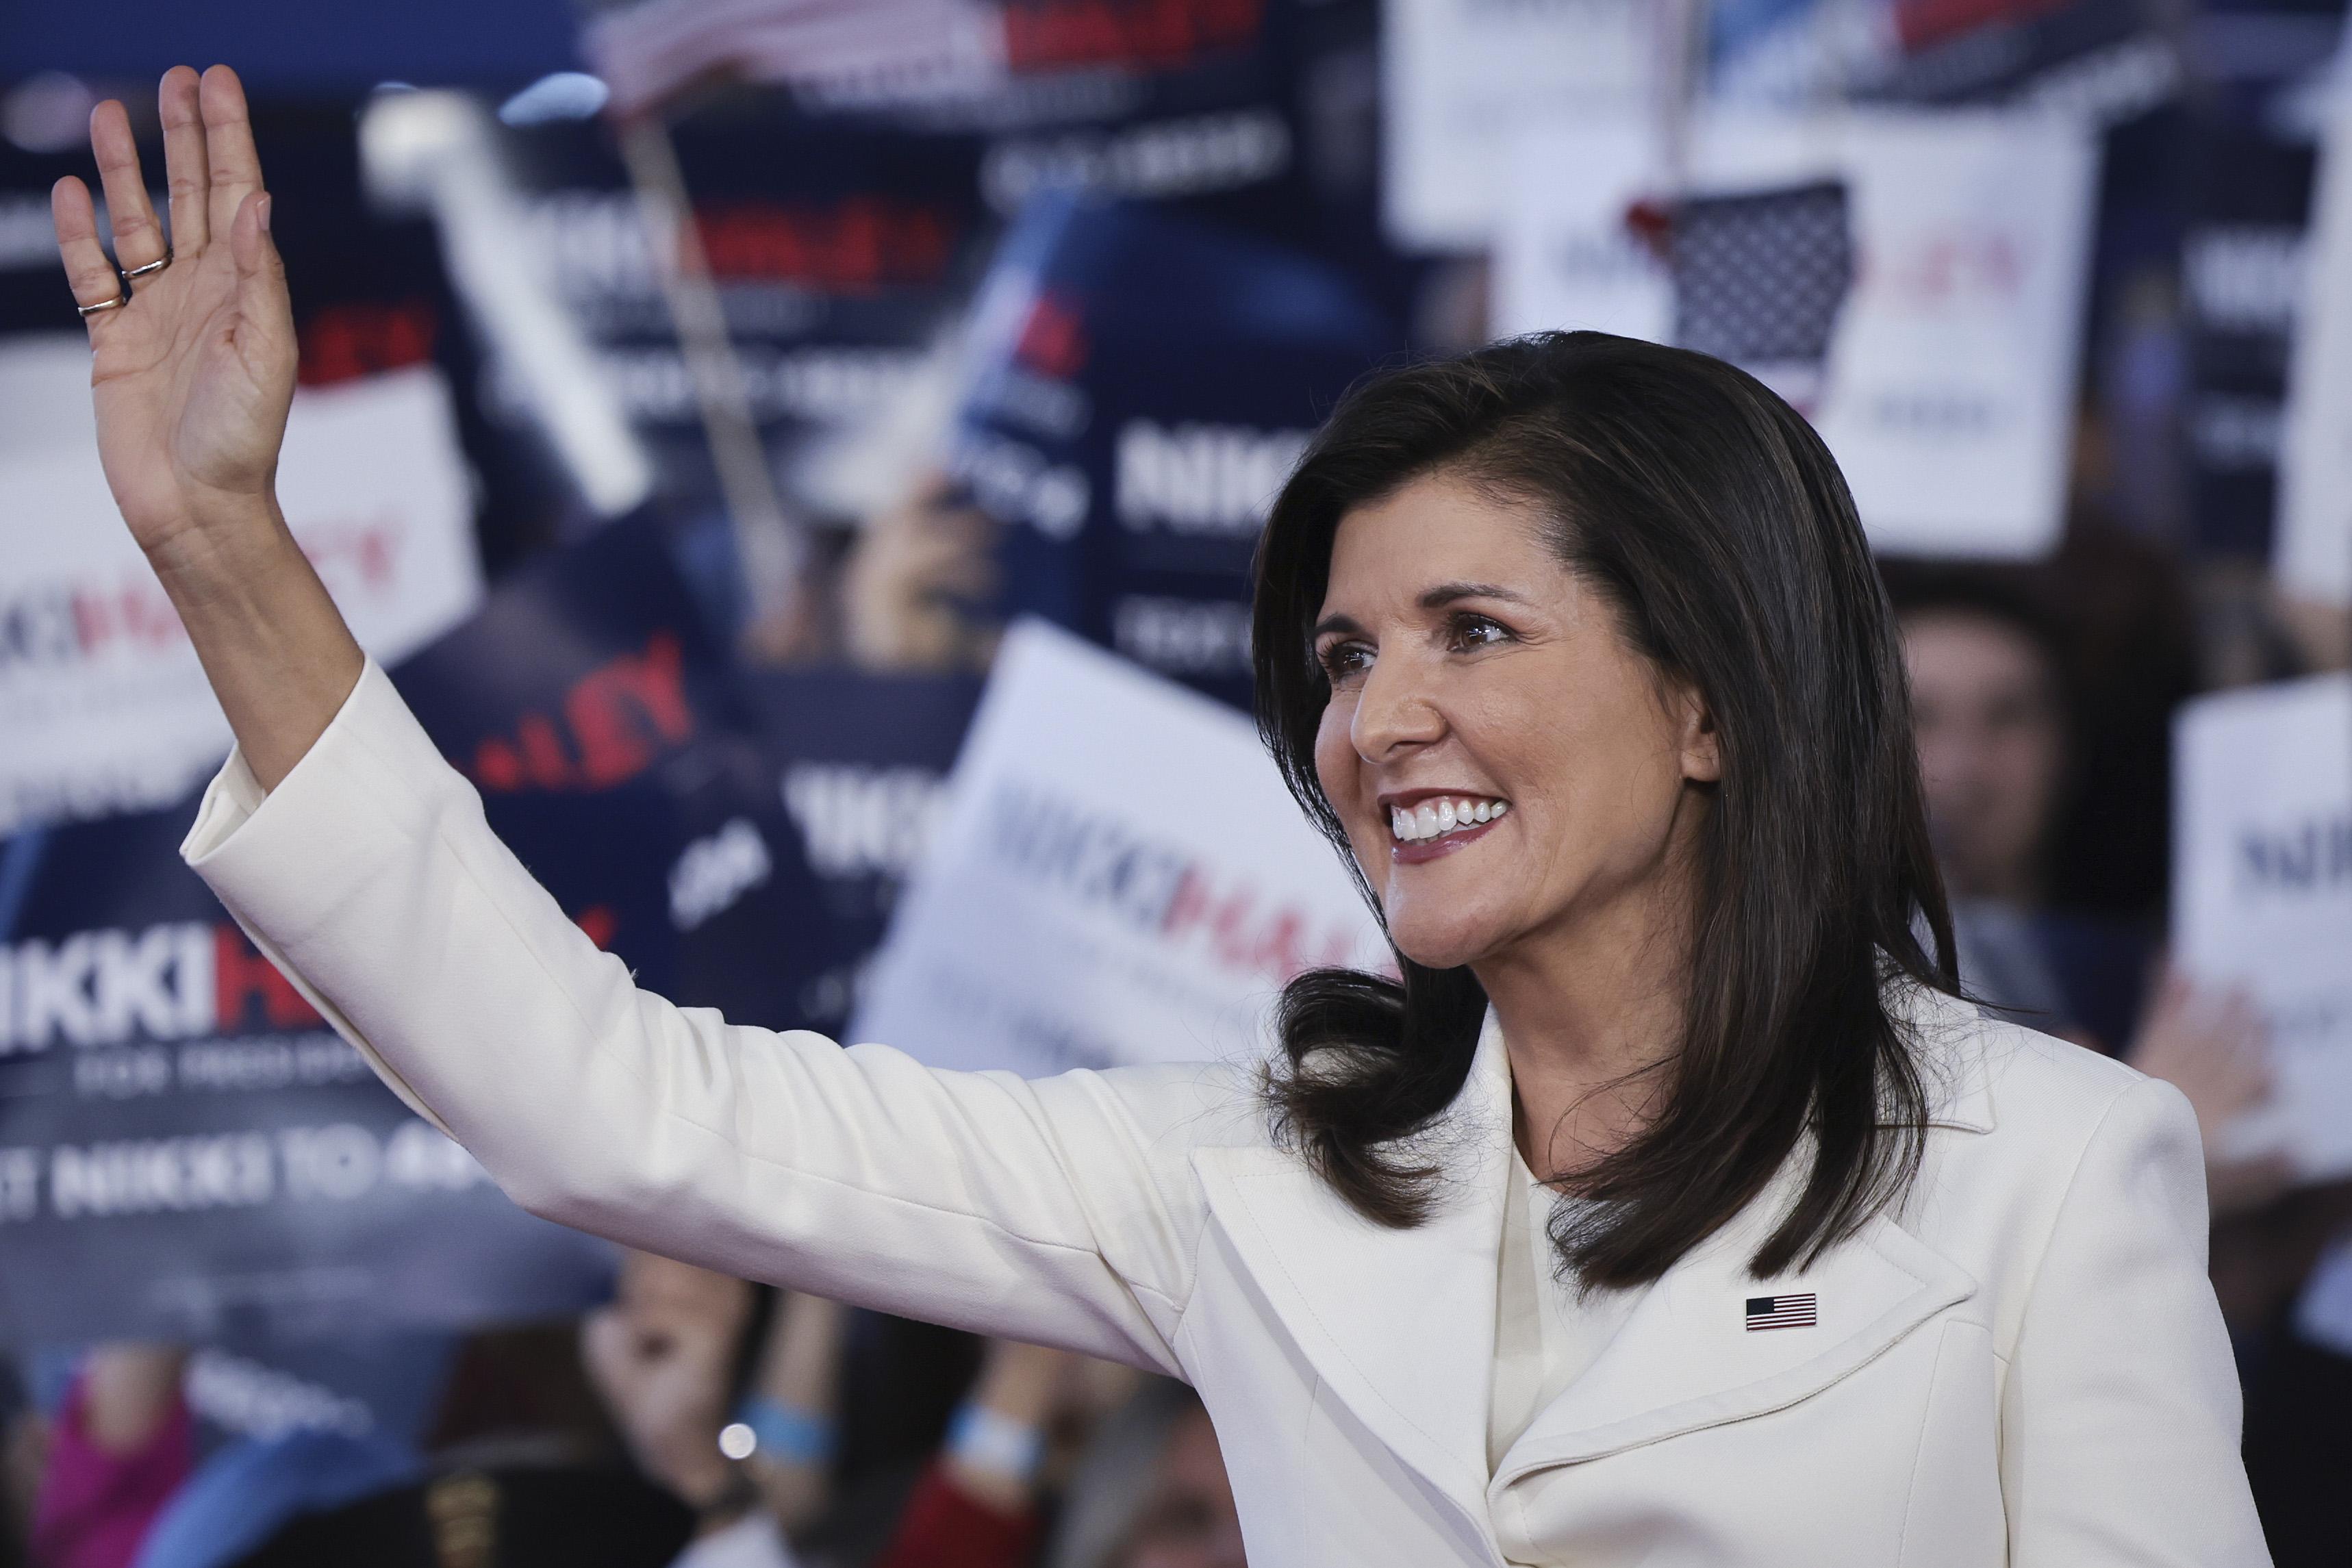 Nikki Haley wavs at supporters while wearing a white jacket with a U.S. flag pin.